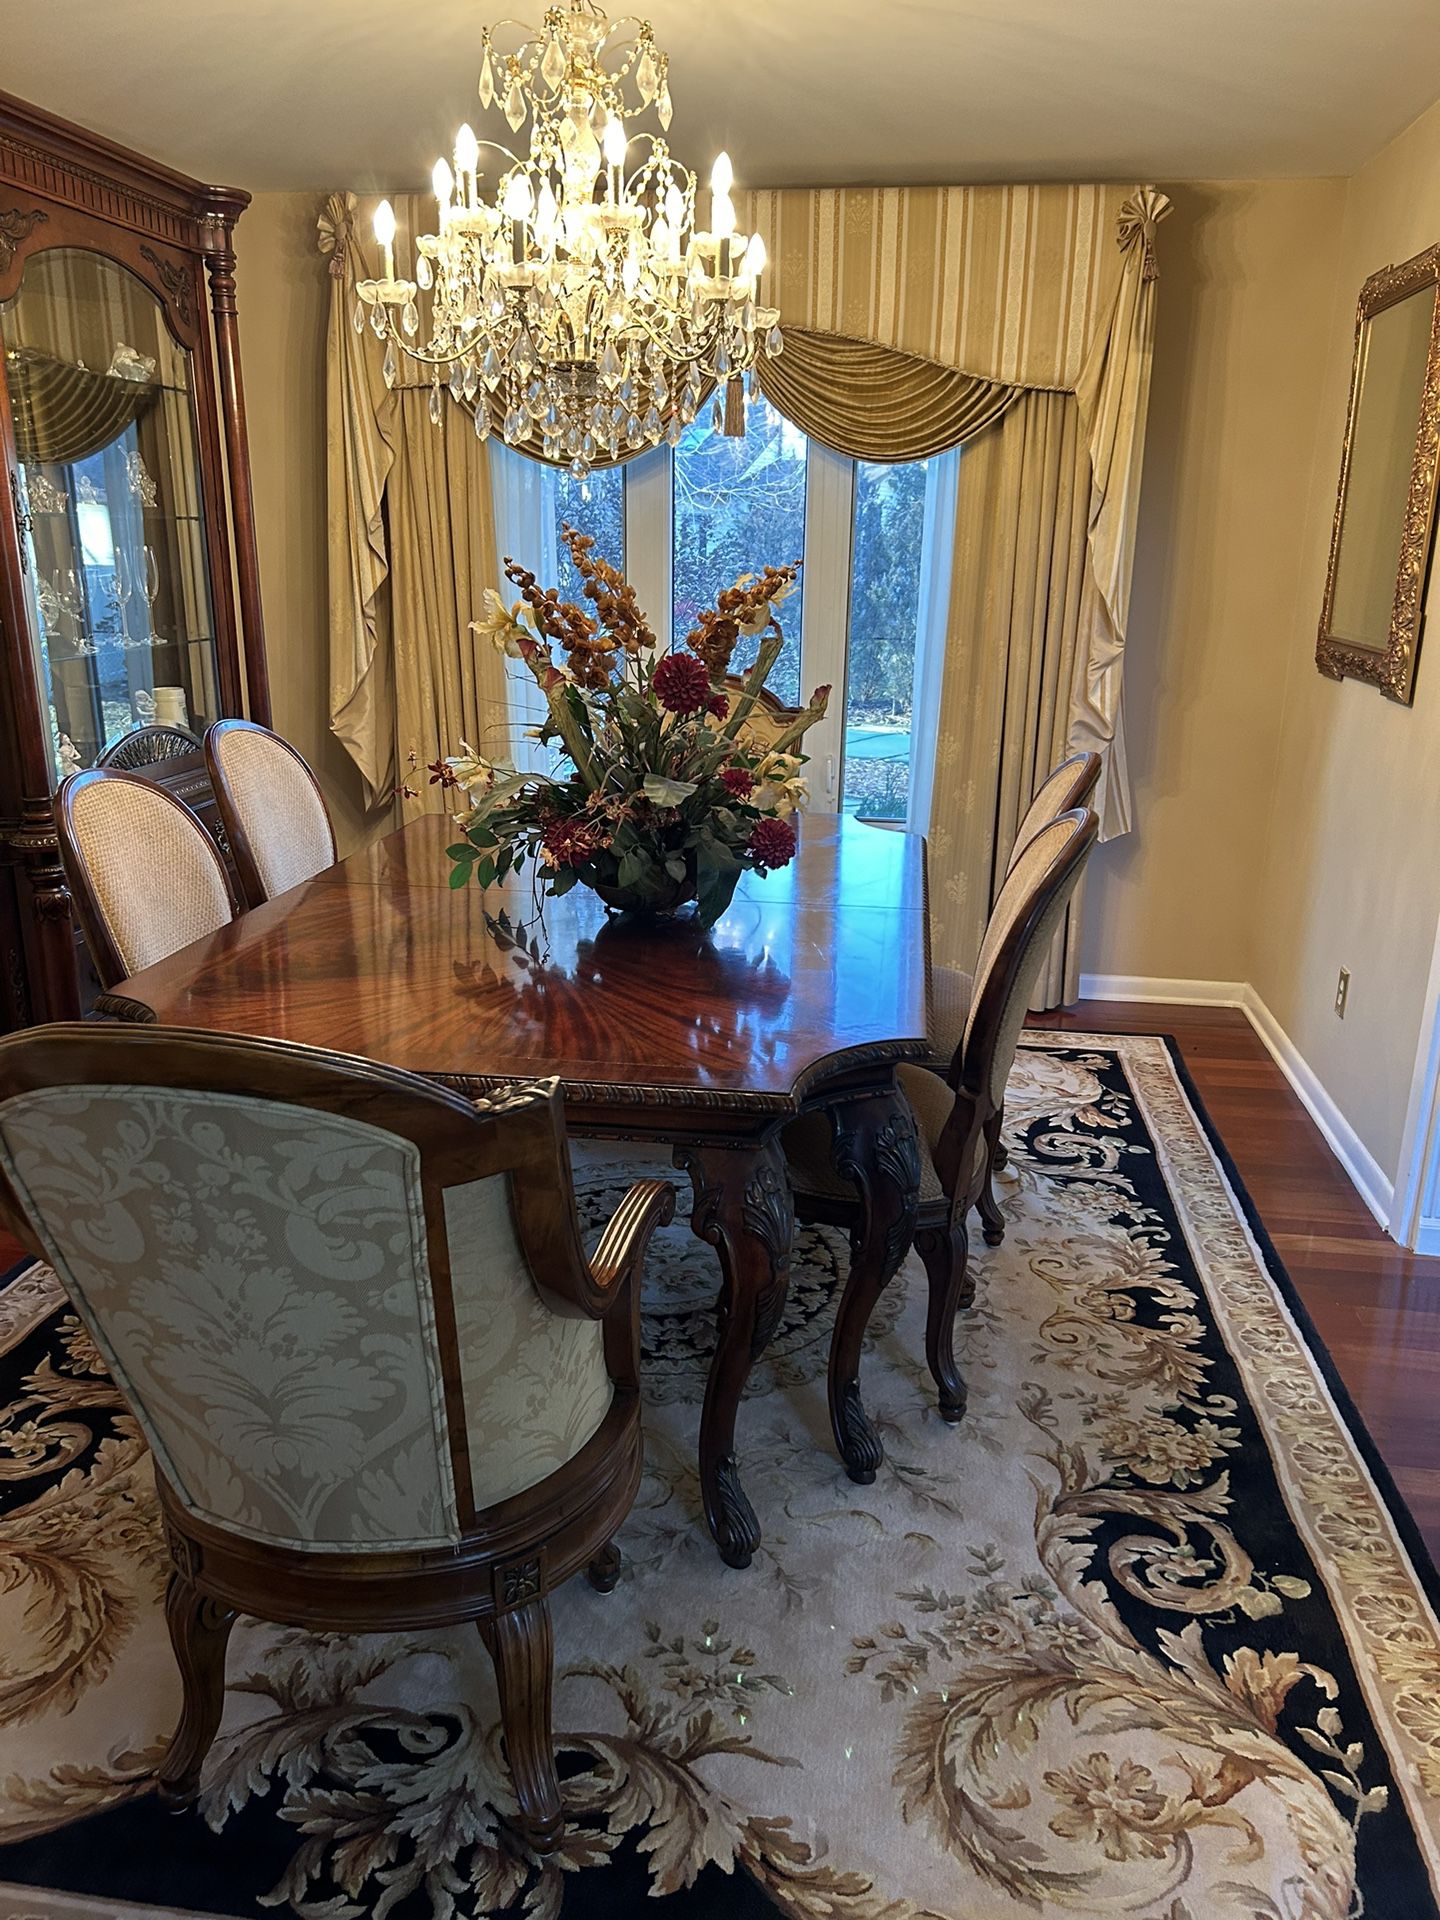 Century Furniture Dining Room Table & Chairs (x6)